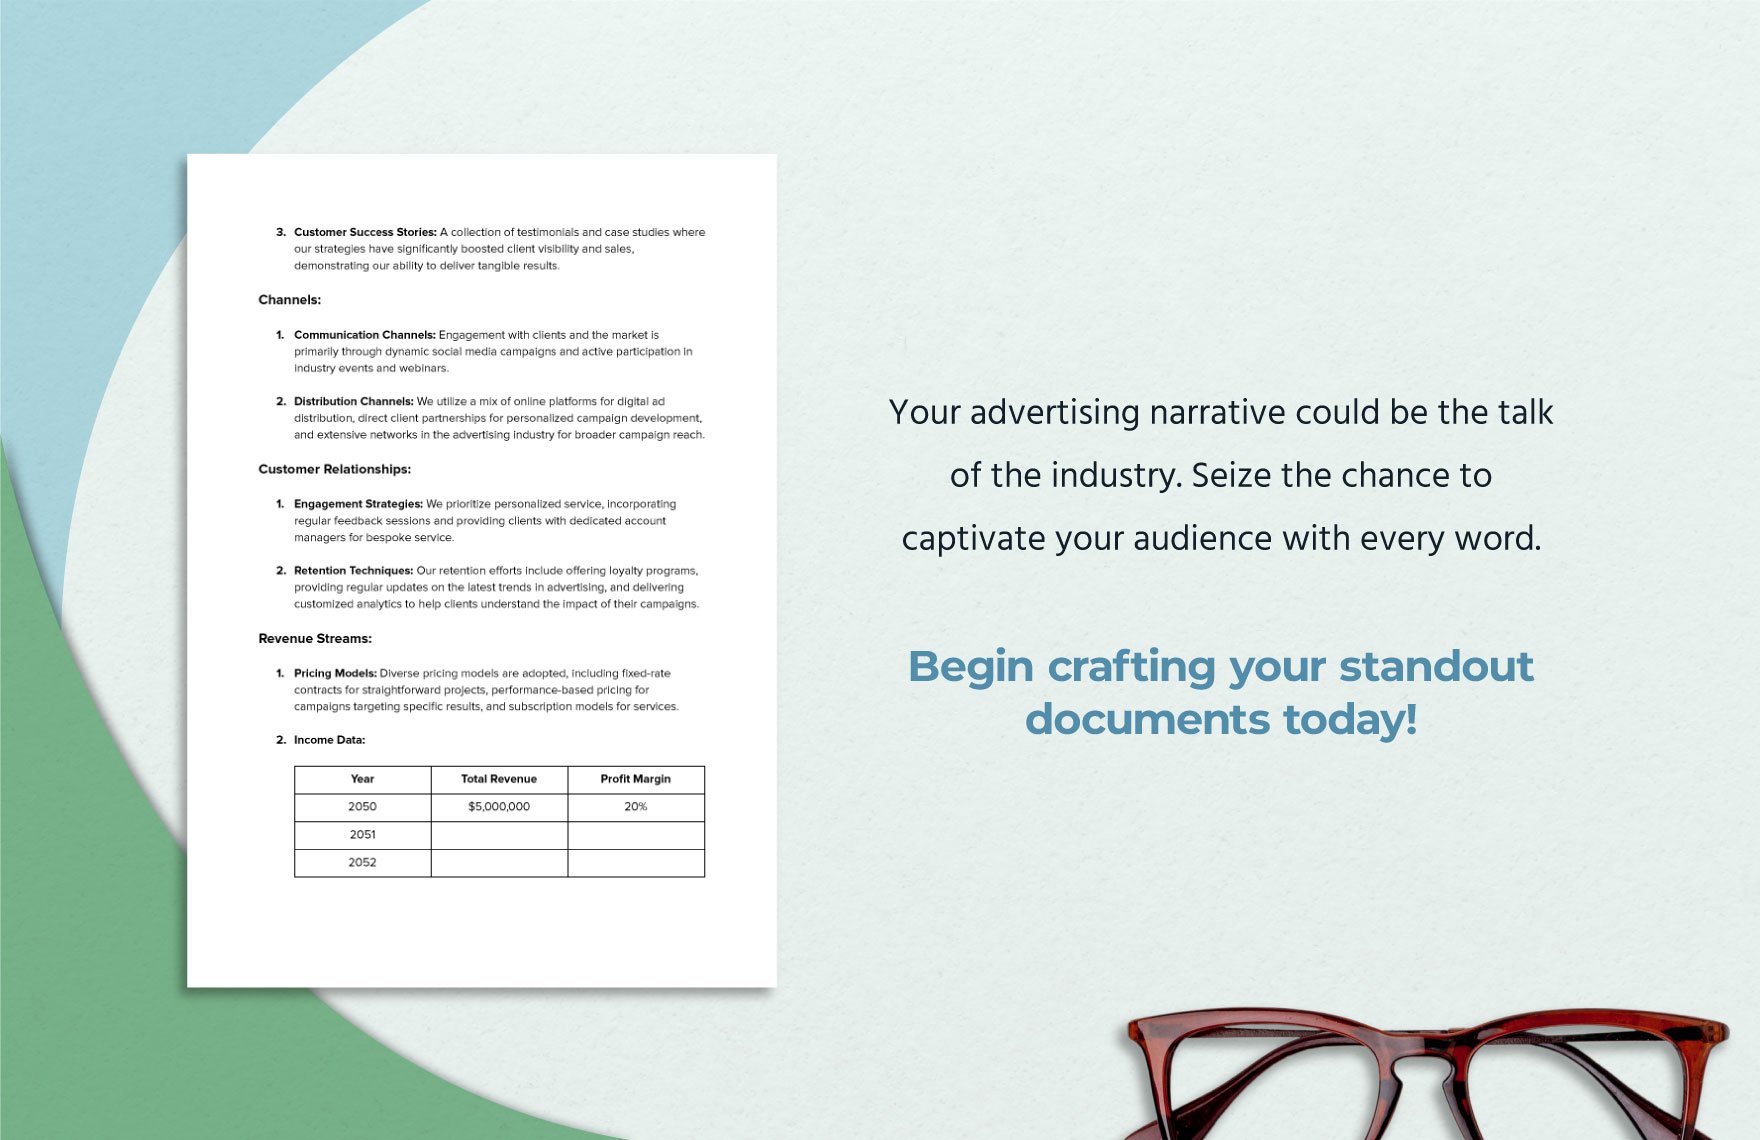 Brand Value Proposition Advertising Canvas Template